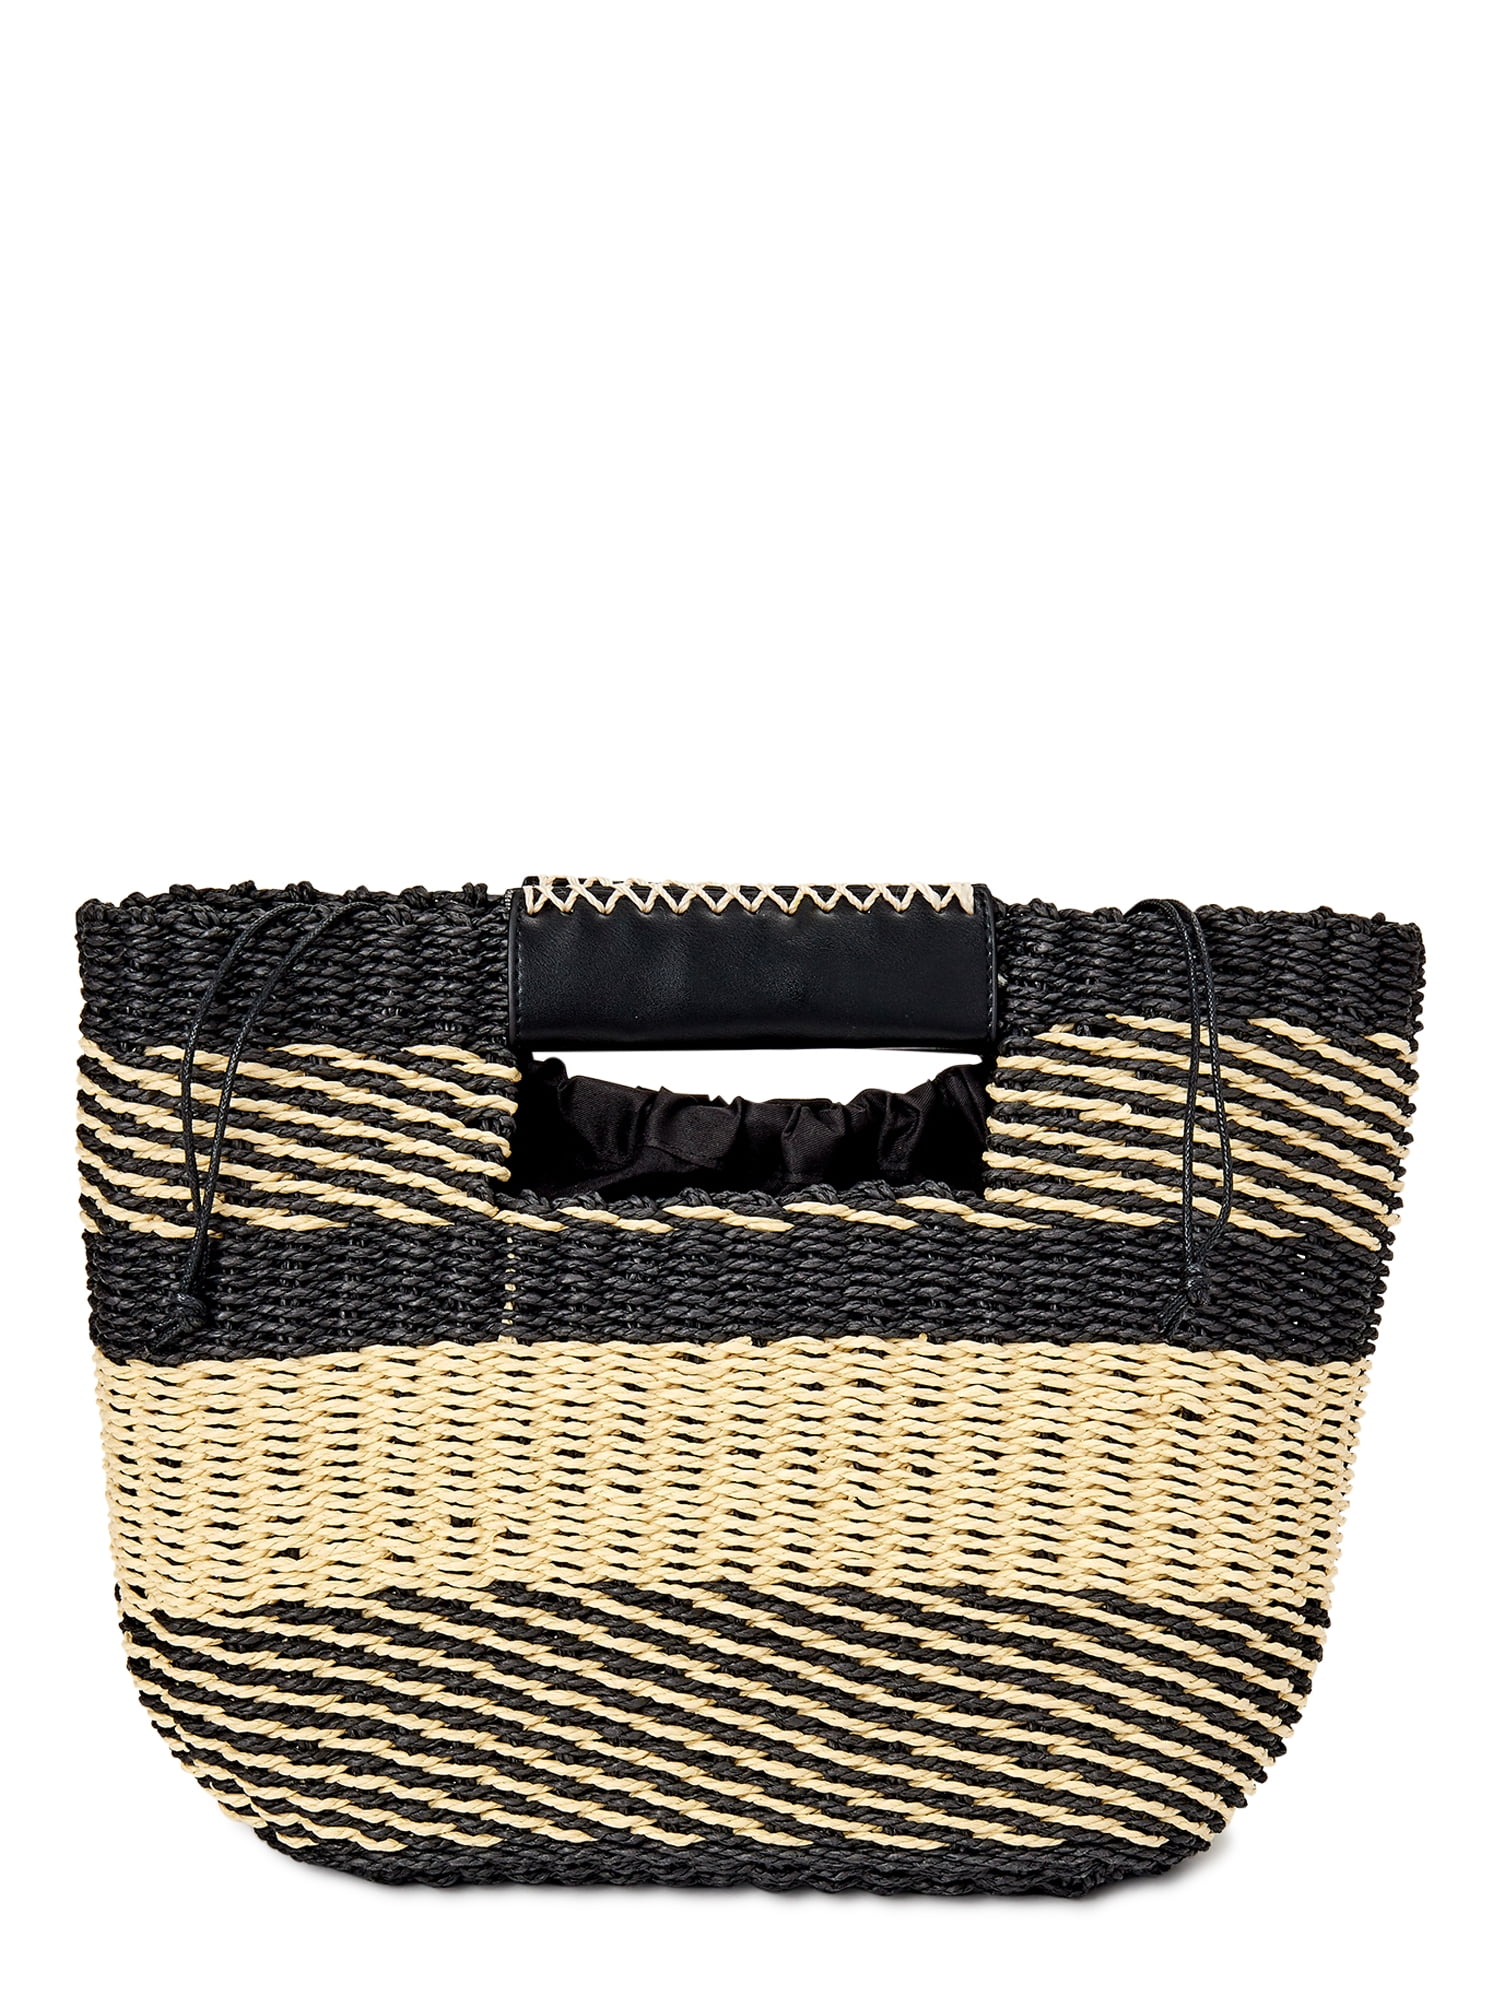 Scoop Women’s Striped Woven Beach Bag with Removable Pouch, Black